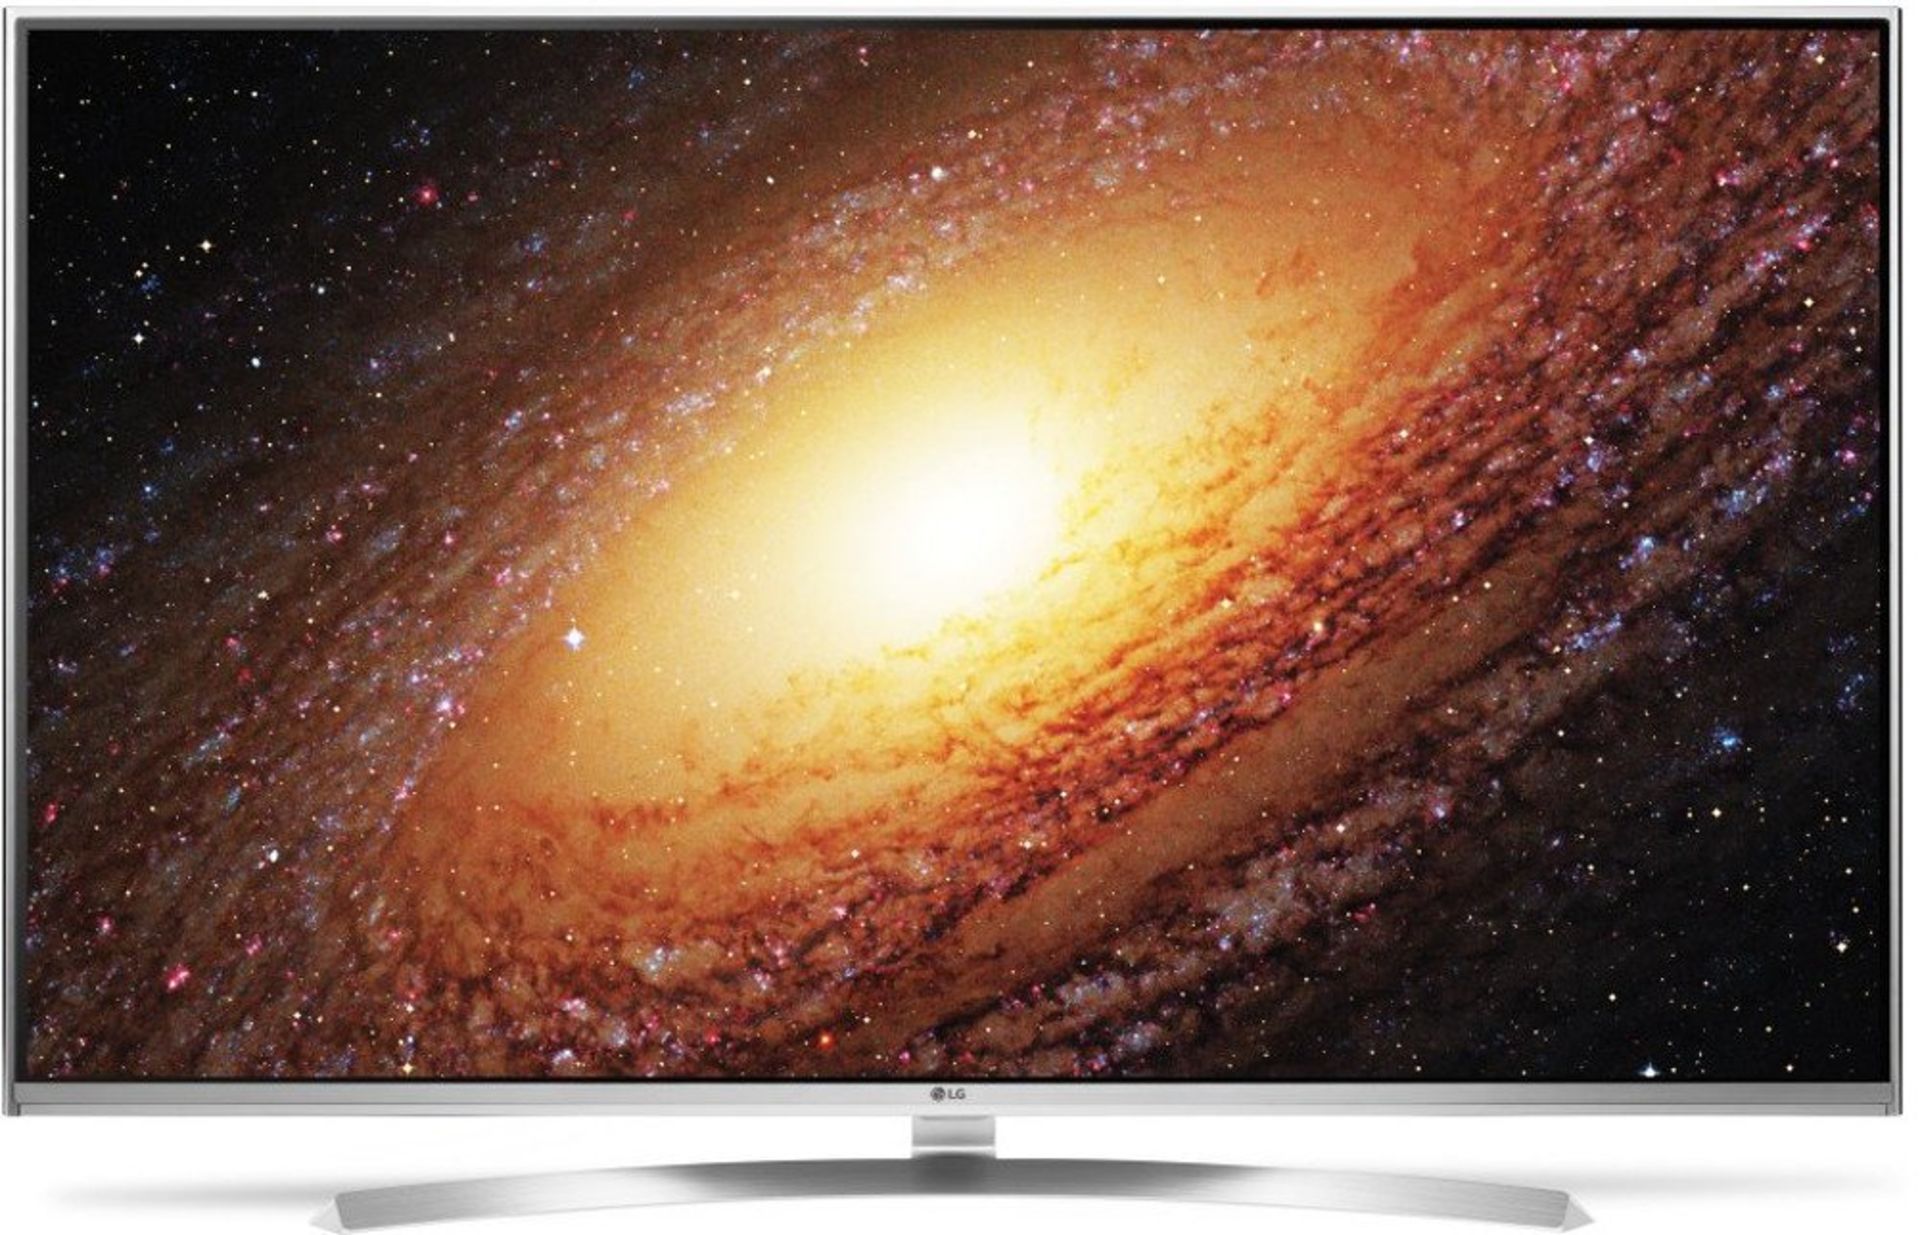 V Grade A LG 55 Inch HDR 4K ULTRA HD LED 3D SMART TV WITH FREEVIEW HD & WEBOS & WIFI 55UH8509